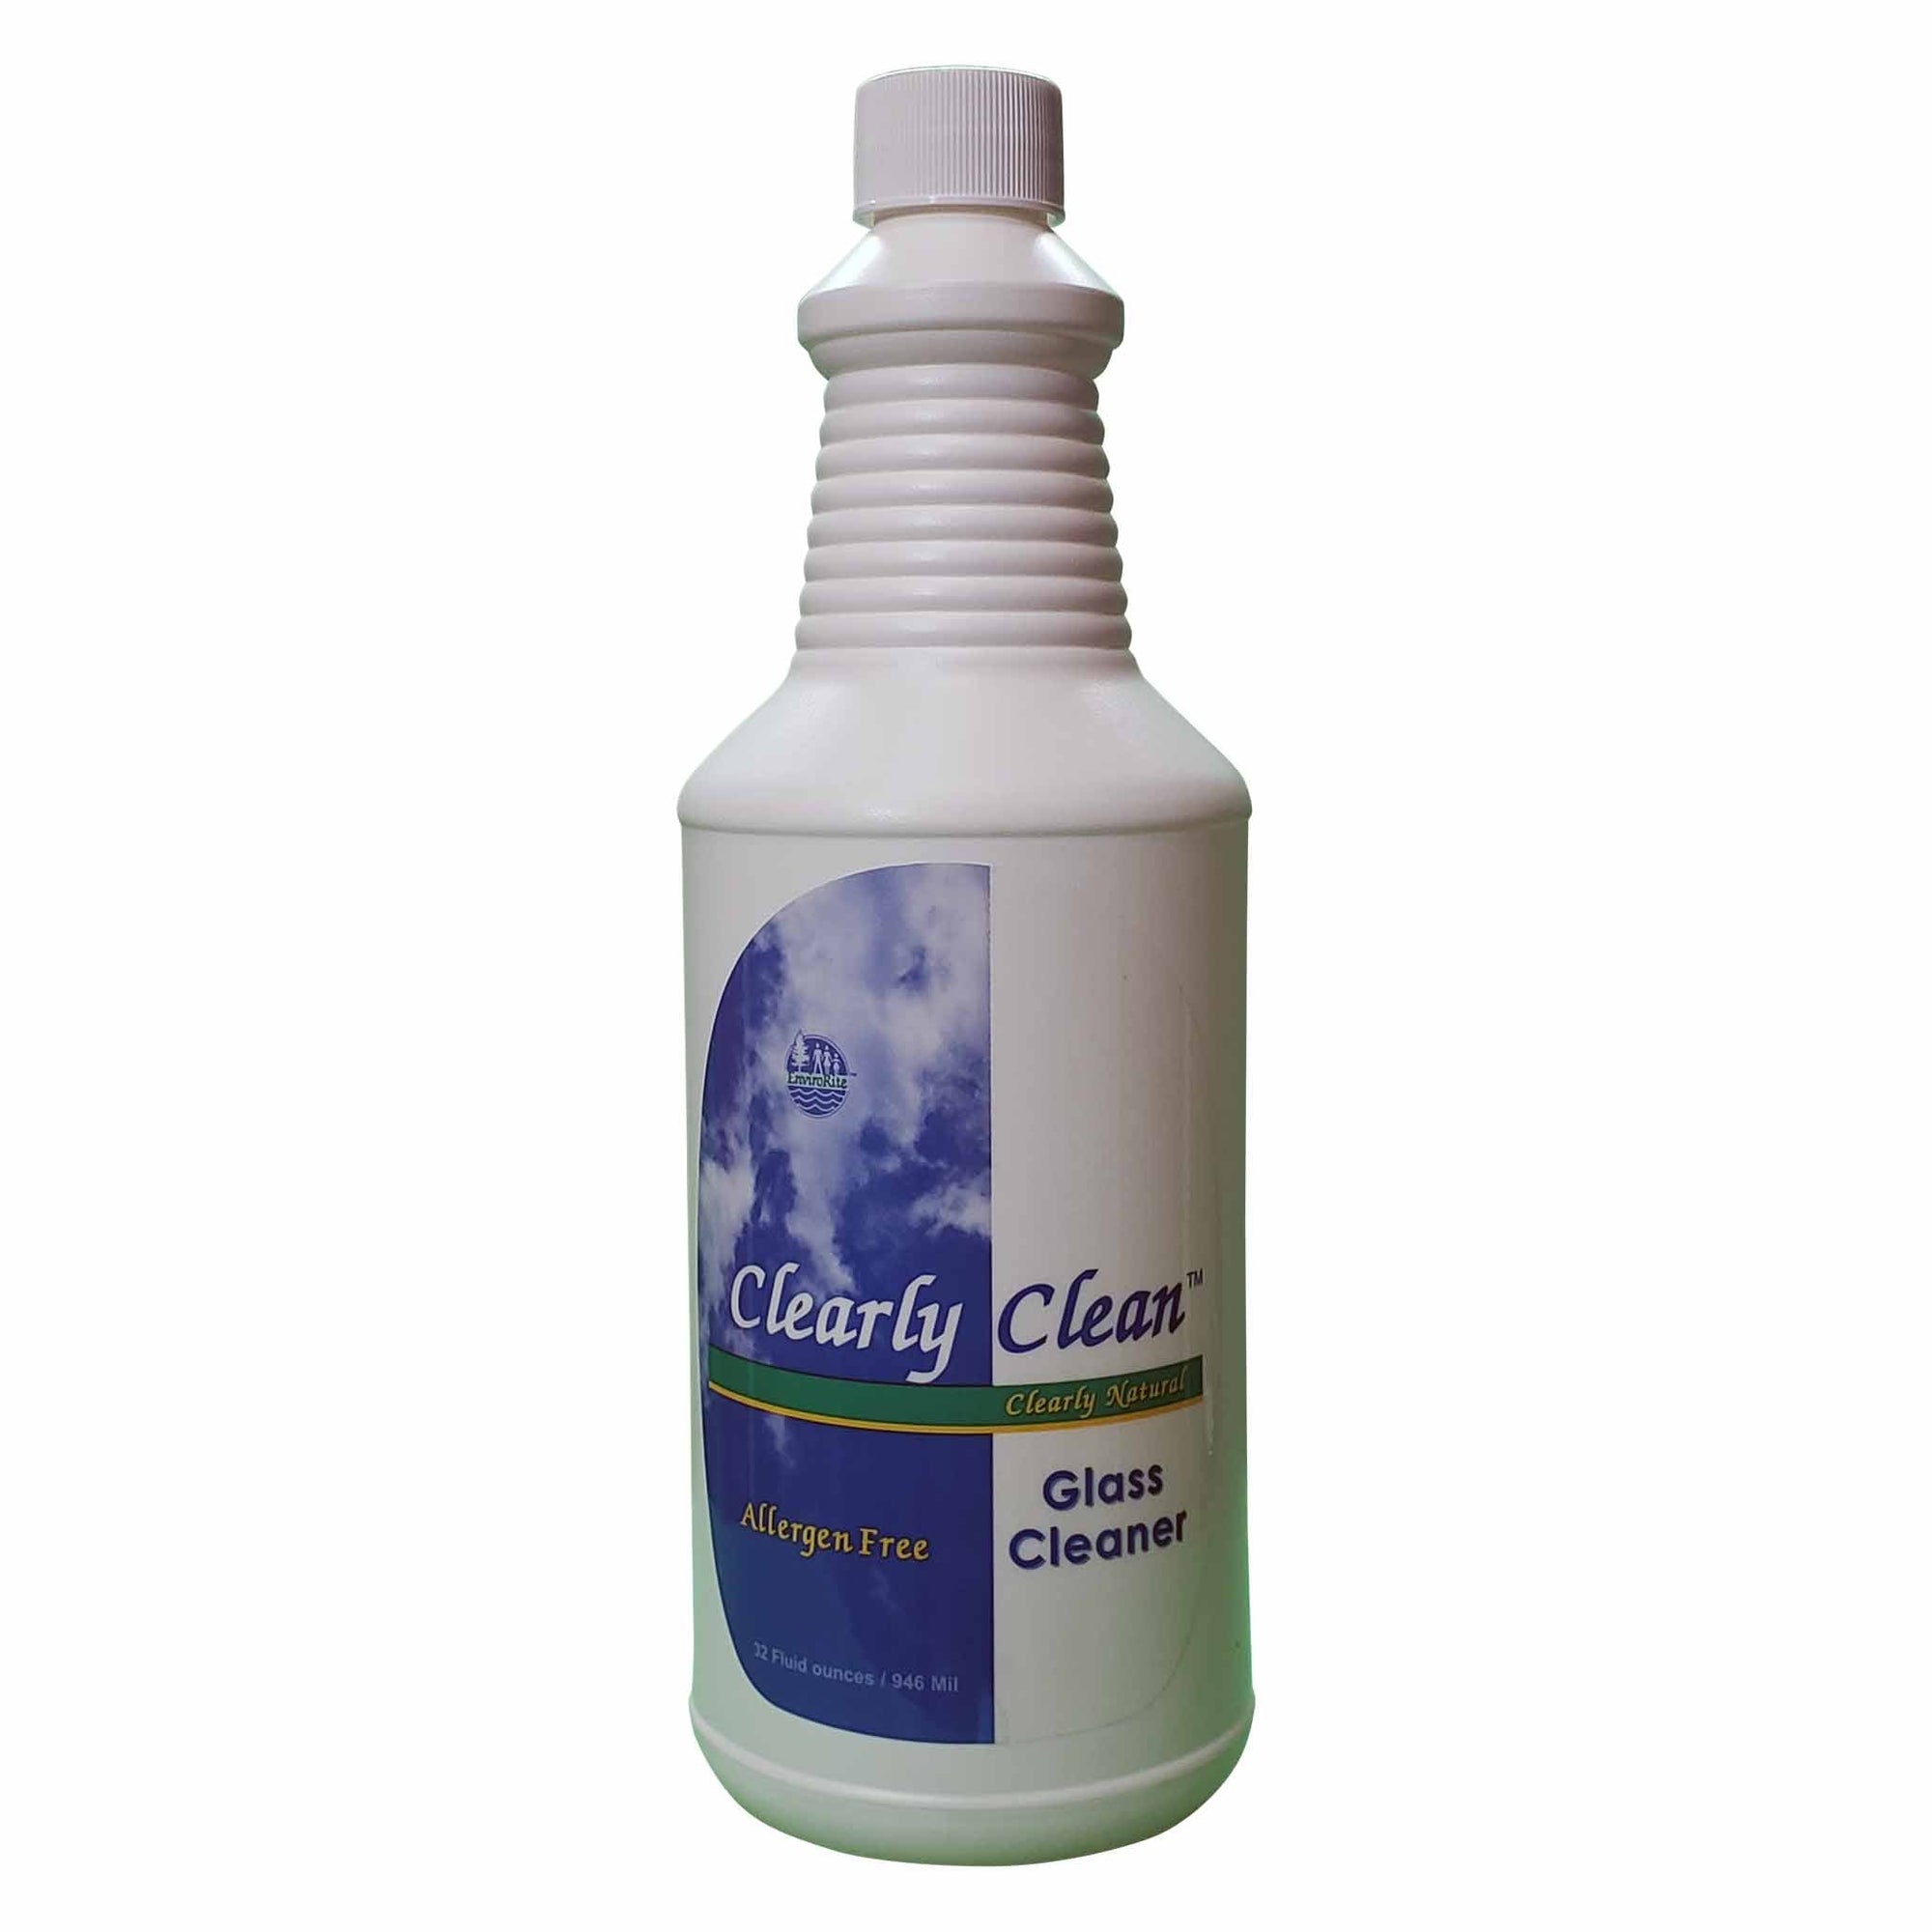 EnviroRite Clearly Clean Glass Cleaner - 32 oz